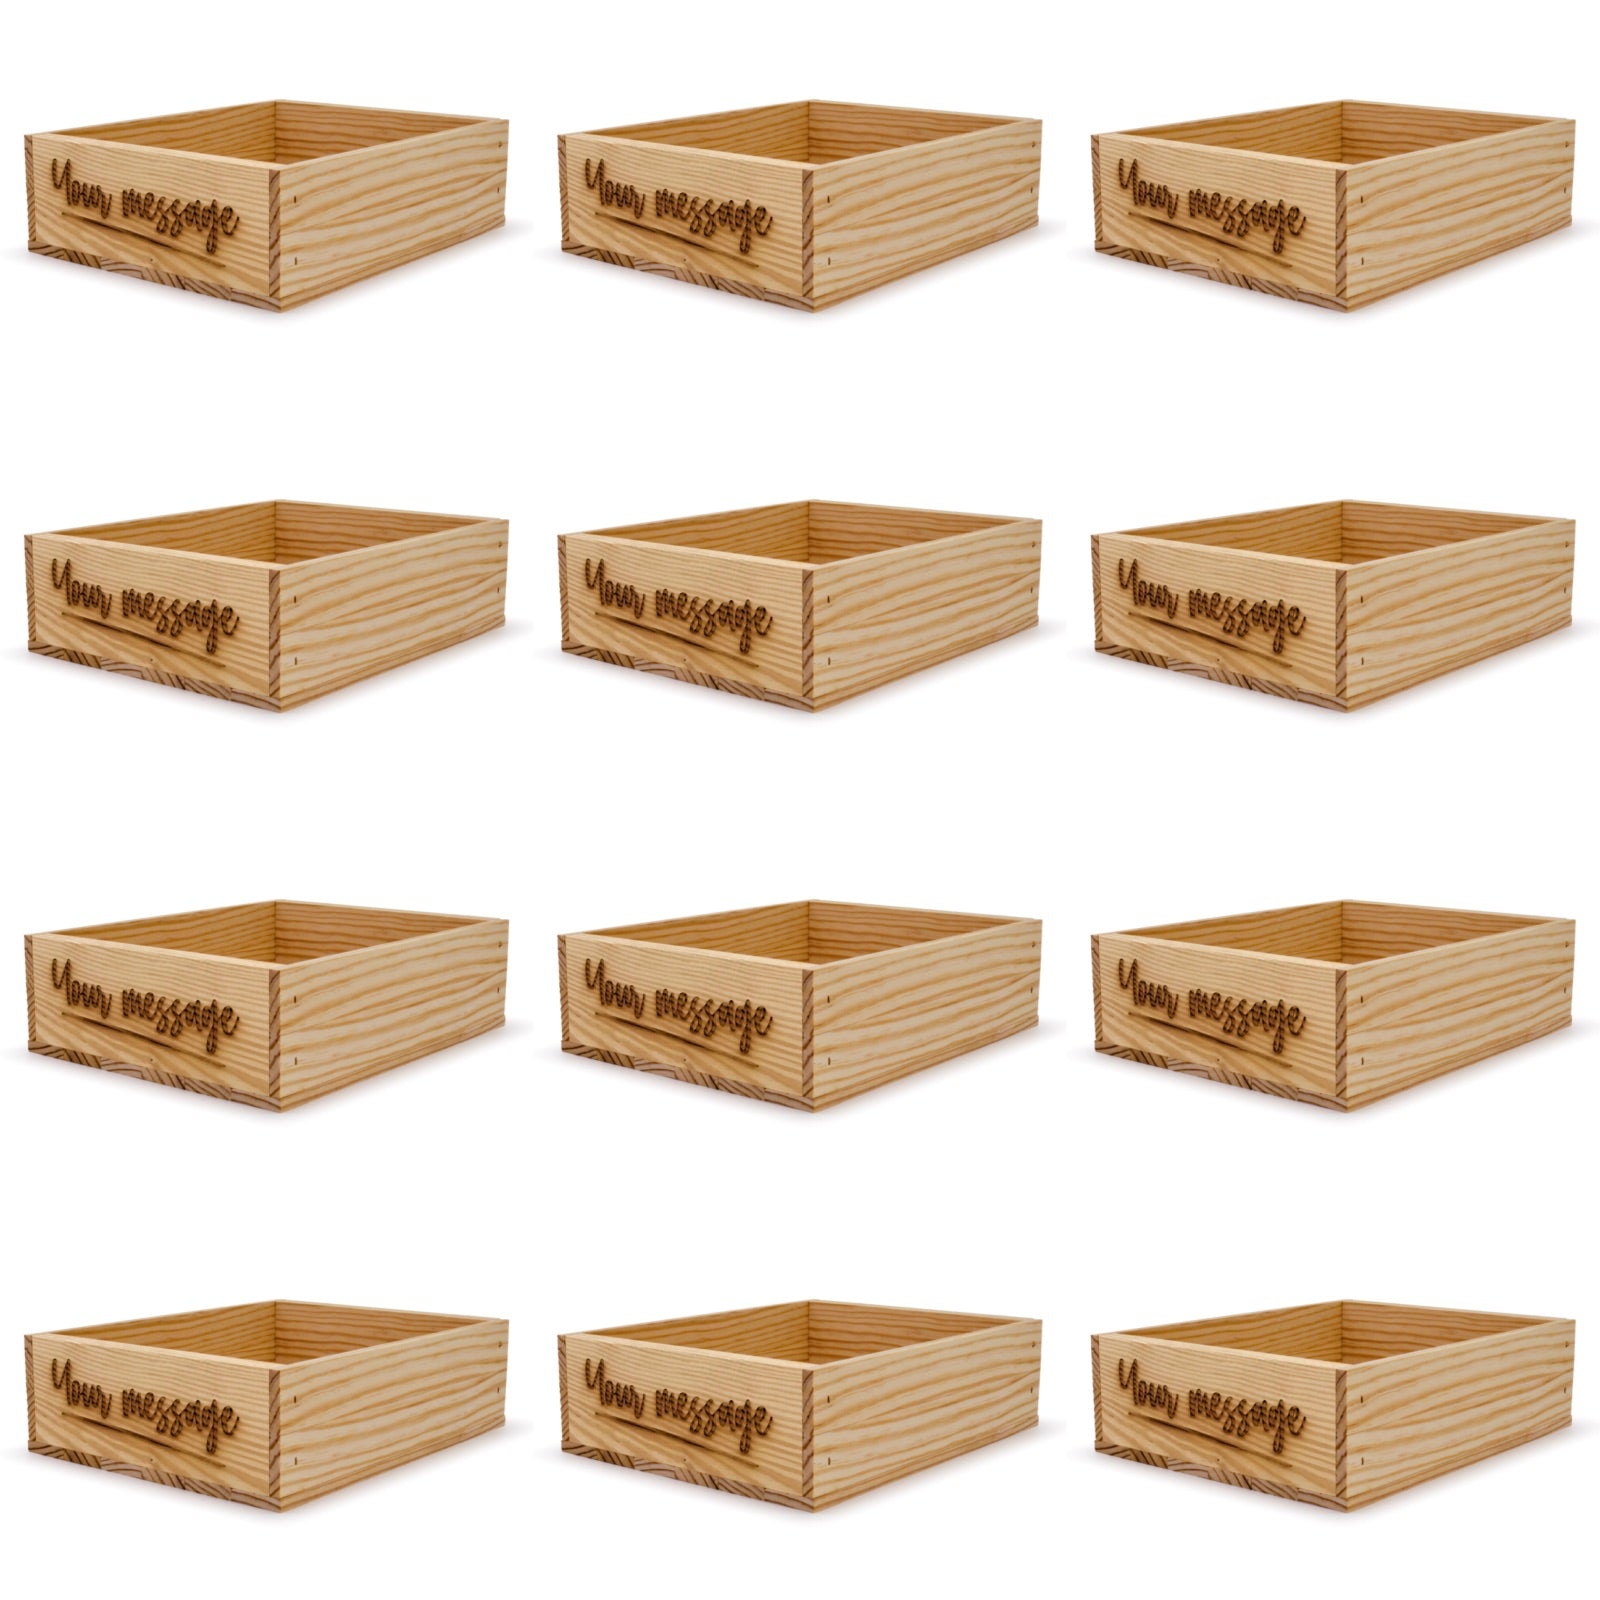 12 Small wooden crates with custom message 12x9.75x3.5